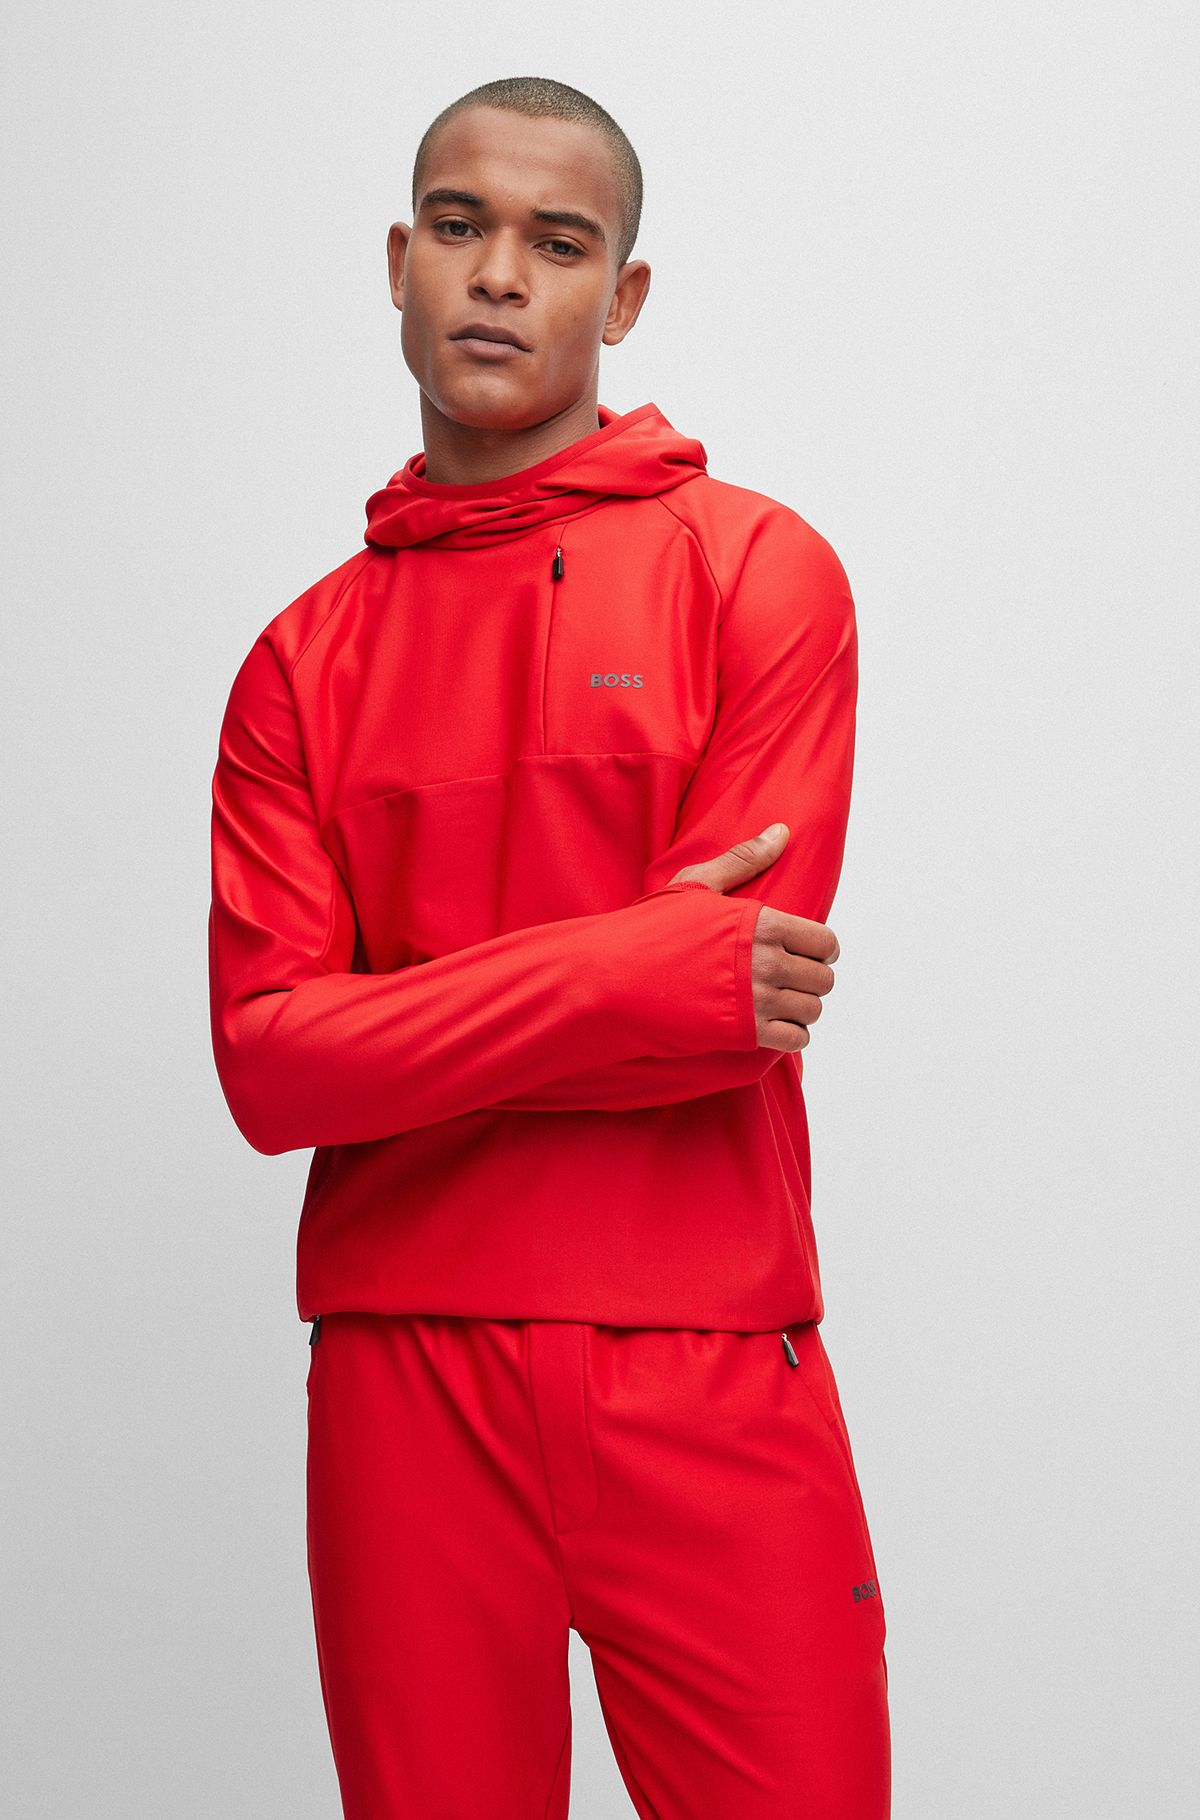 Men's Red Tracksuit, Red Sweat Suit